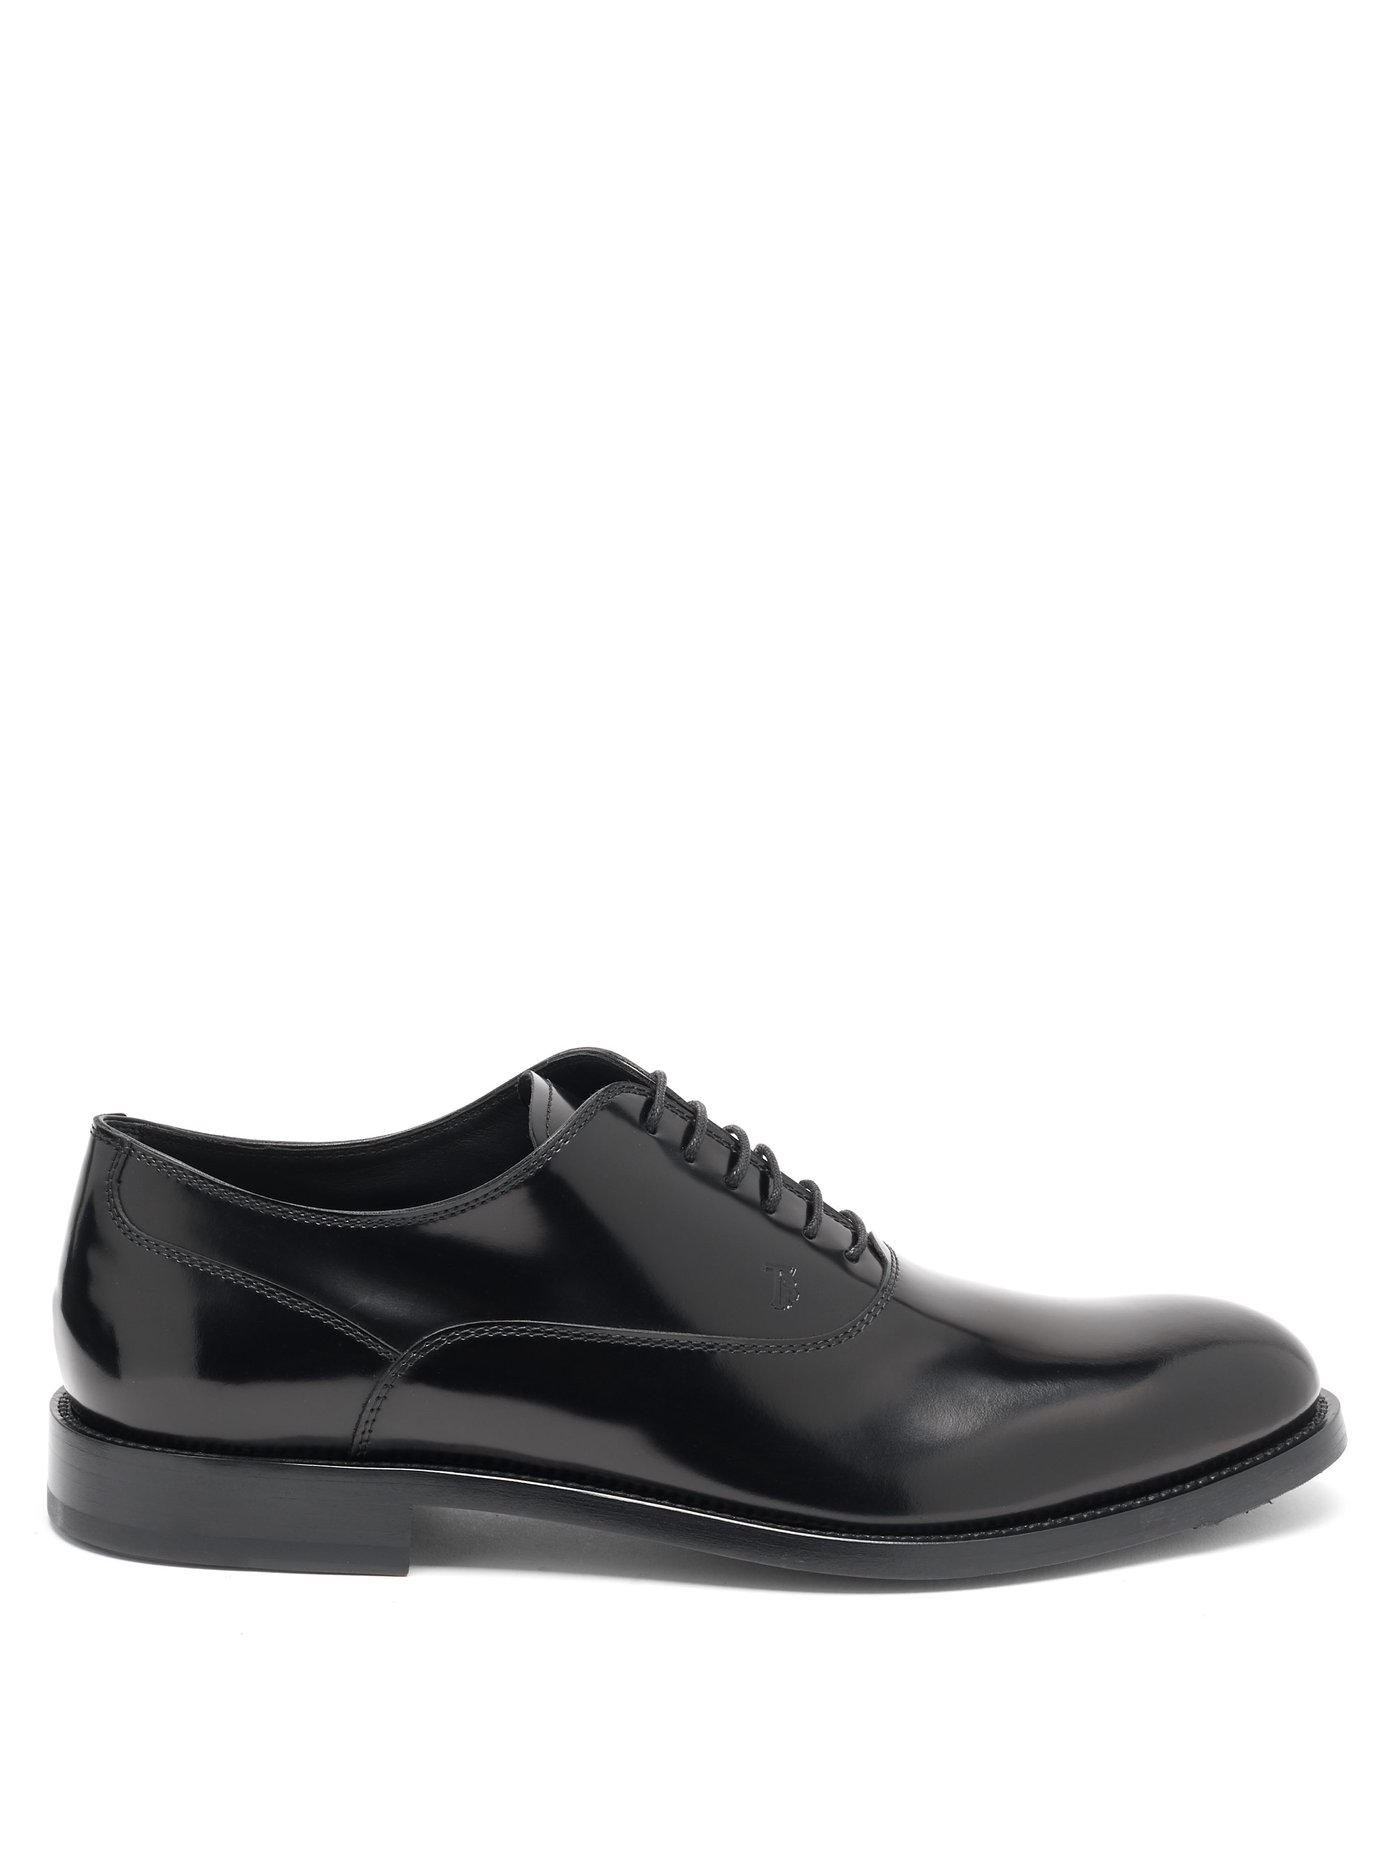 Janeiro leather Oxford shoes | Tod's 